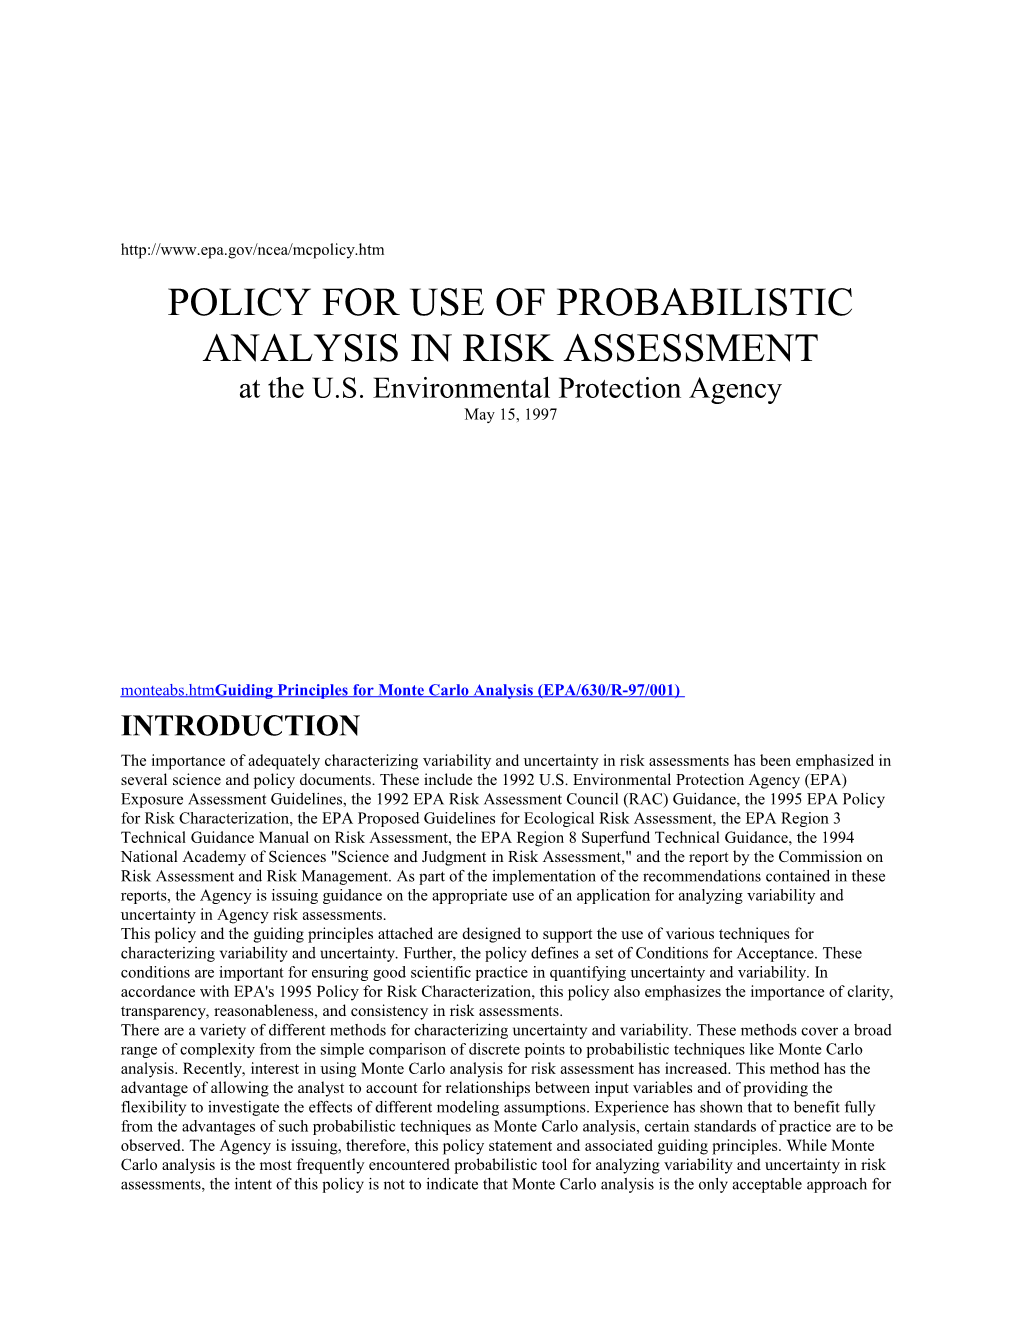 POLICY for USE of PROBABILISTIC ANALYSIS in RISK ASSESSMENT at the U.S. Environmental Protection